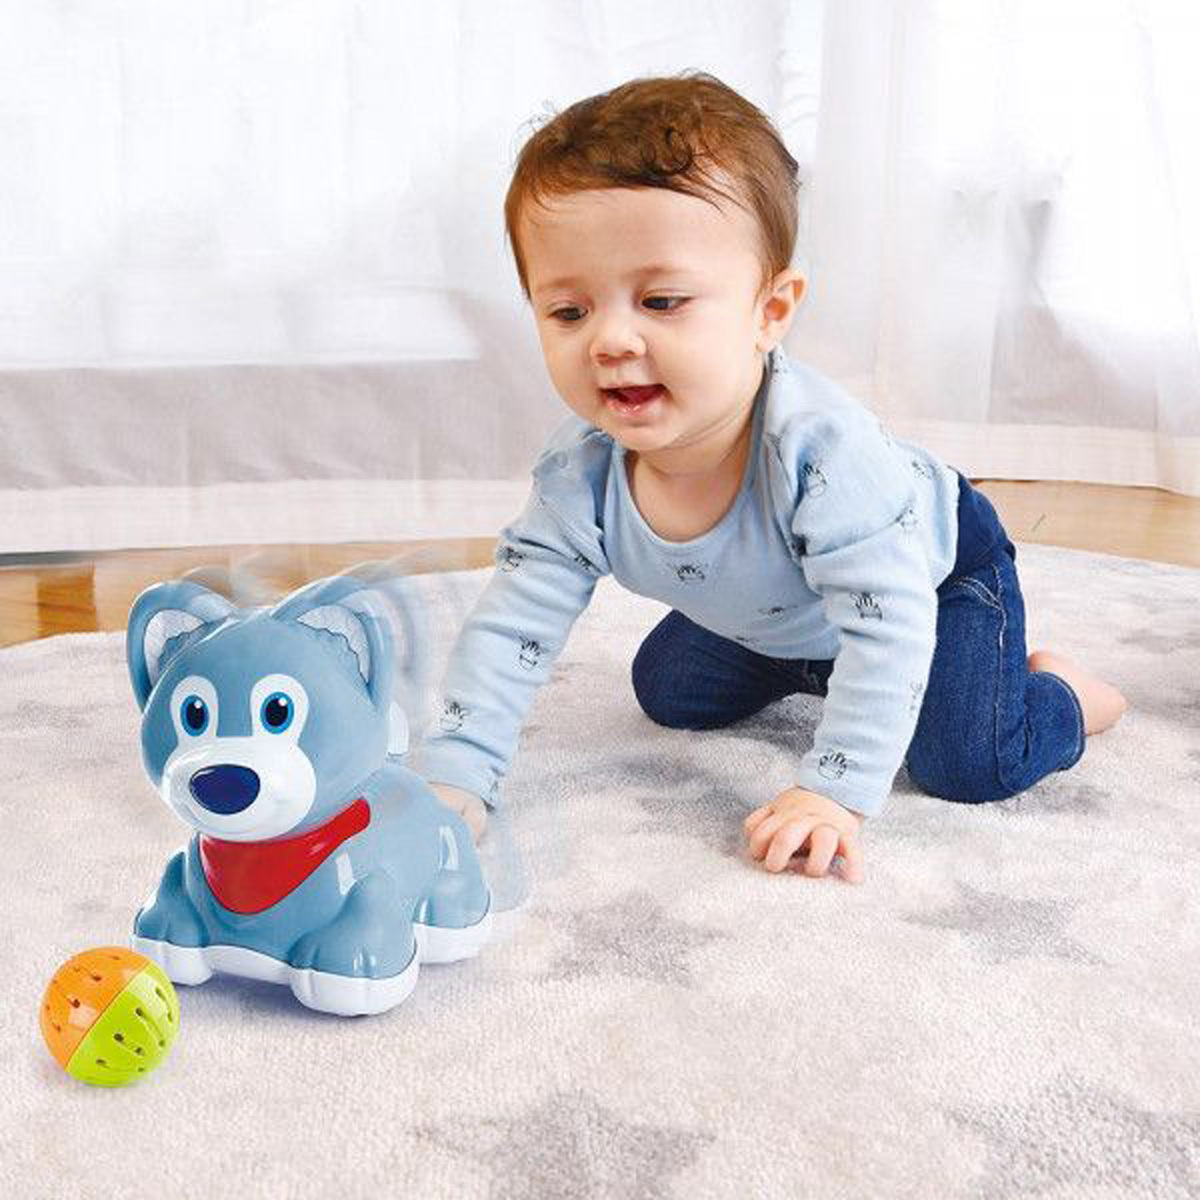 PlayGo Play with Me Puppy, Multicolour, PLY2280